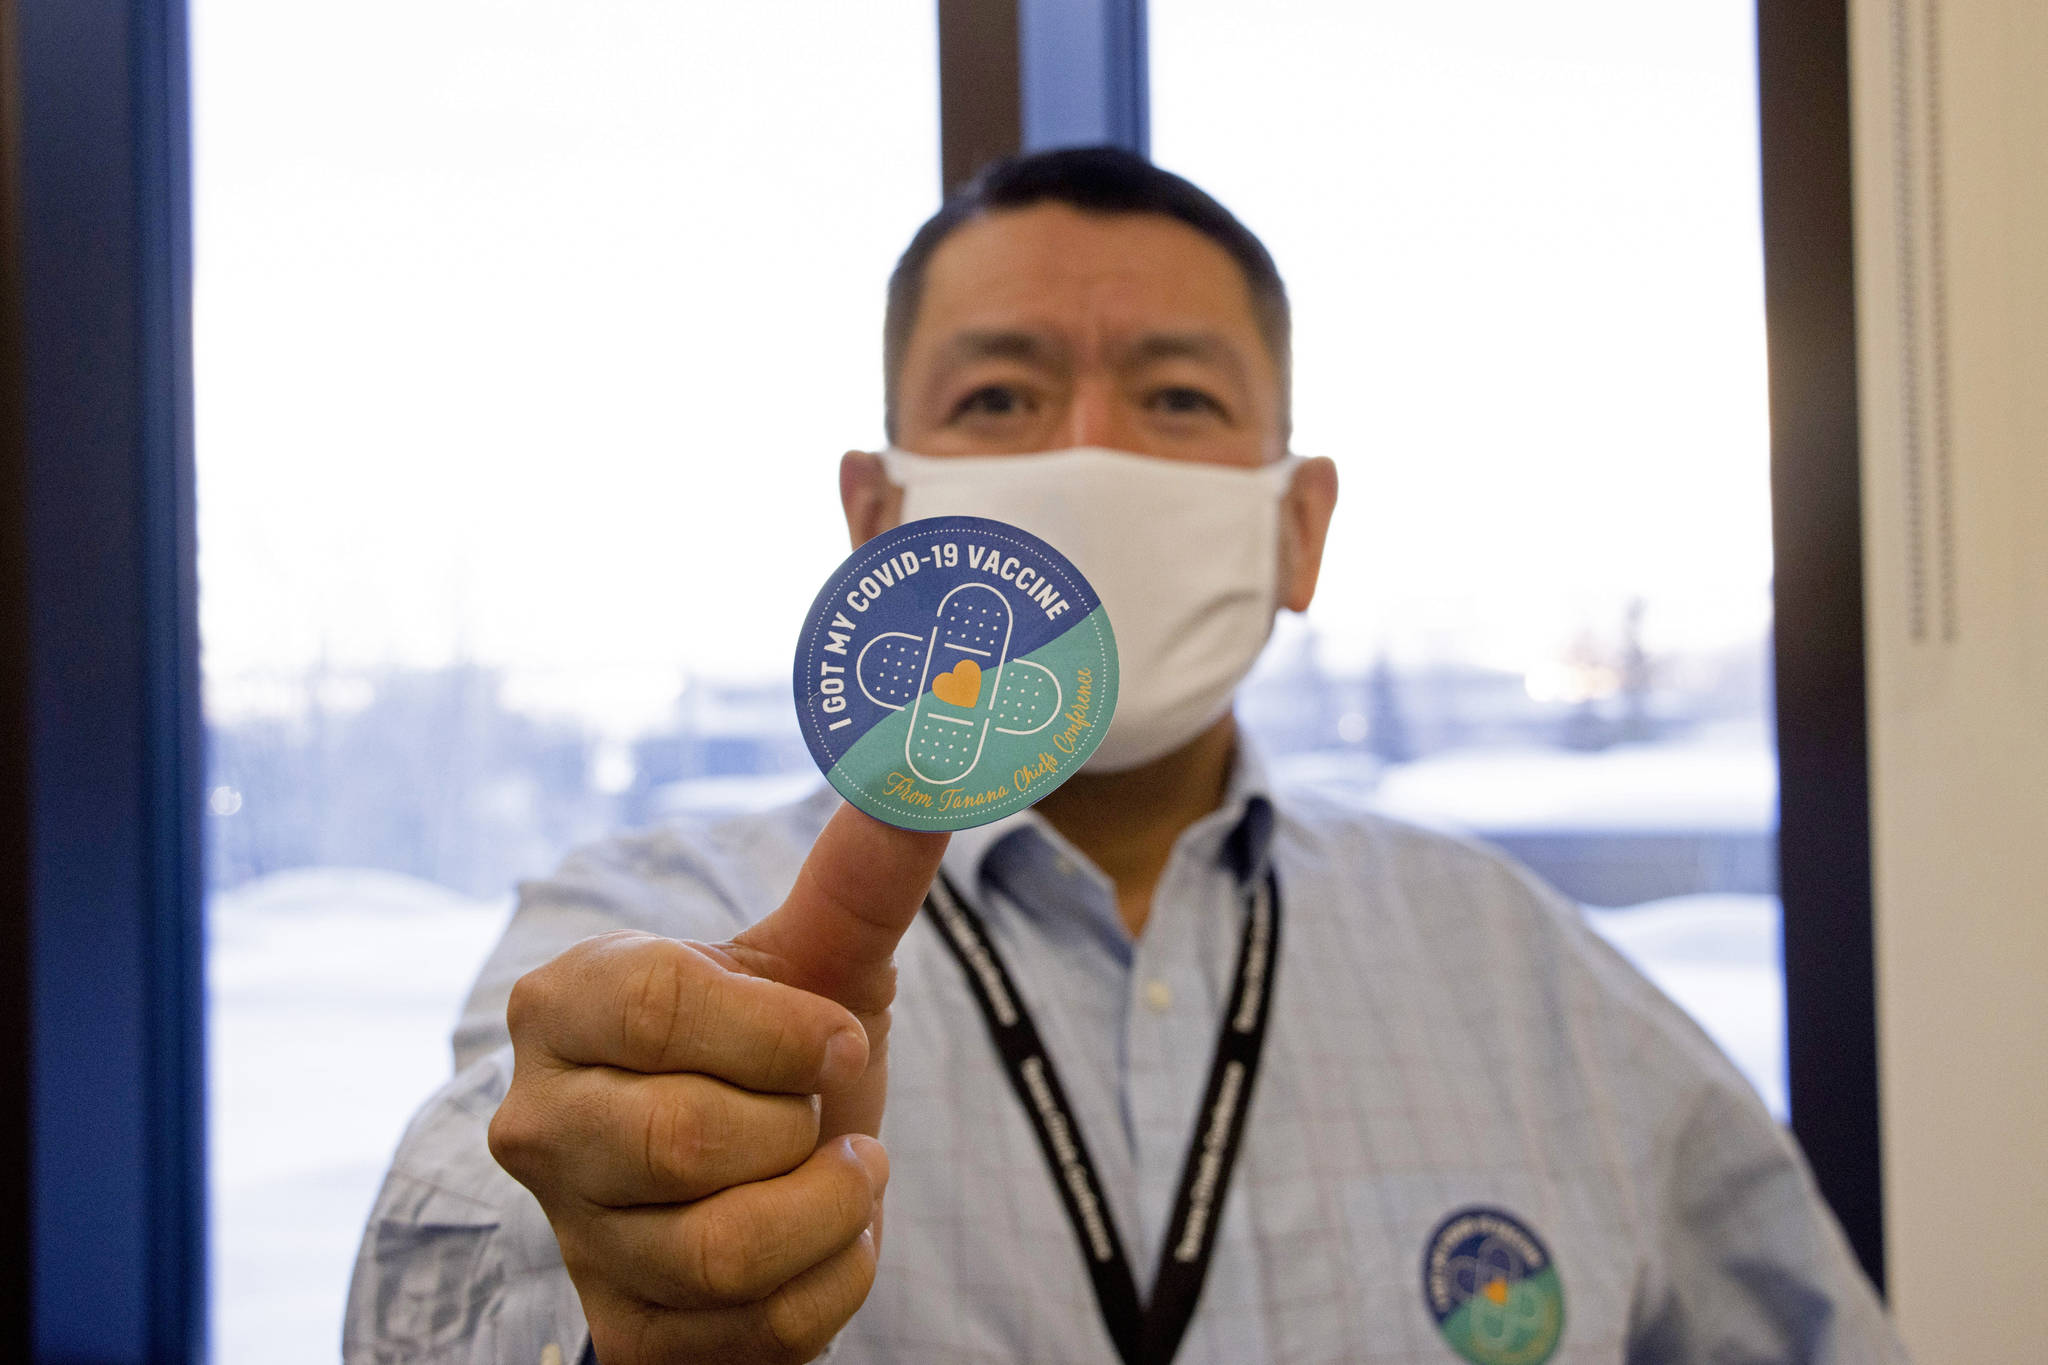 In this undated photo provided by the Tanana Chiefs Conference, shows PJ Simon, chief and chairman of the conference, from Fairbanks, Alaska, displaying a COVID-19 vaccination sticker. Alaska has been one of the leading states in the percentage of its population to be vaccinated against COVID-19. But some of Alaska’s highest vaccination rates have been in some of its most remote, hardest-to-access communities, where the toll of past flu or tuberculosis outbreaks hasn’t been forgotten. (Rachel Saylor / Tanana Chiefs Conference)